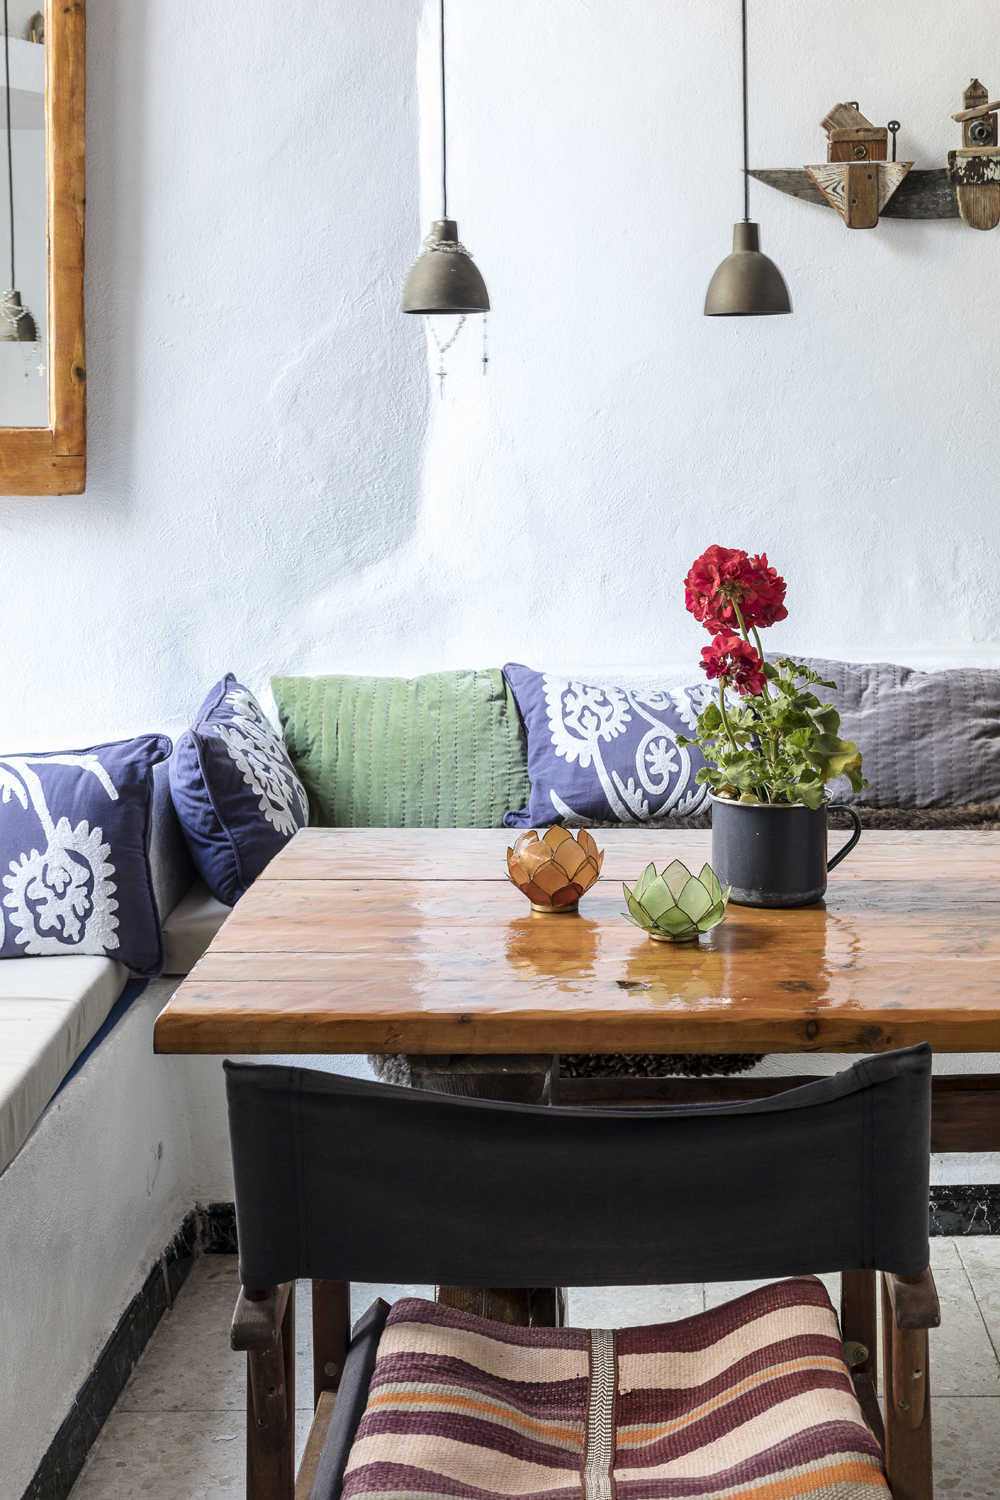 Canillas de Aceituno, Spain, holiday, rent, apartment, townhouse, rental, vacationhome, home, interior, spanish, style, interiorphotography, interior design, photographer, Frida Steiner, Visualaddict, visualaddictfrida, kitchen, dining, diningroom, diningtable, benches, pillows, colorful interior